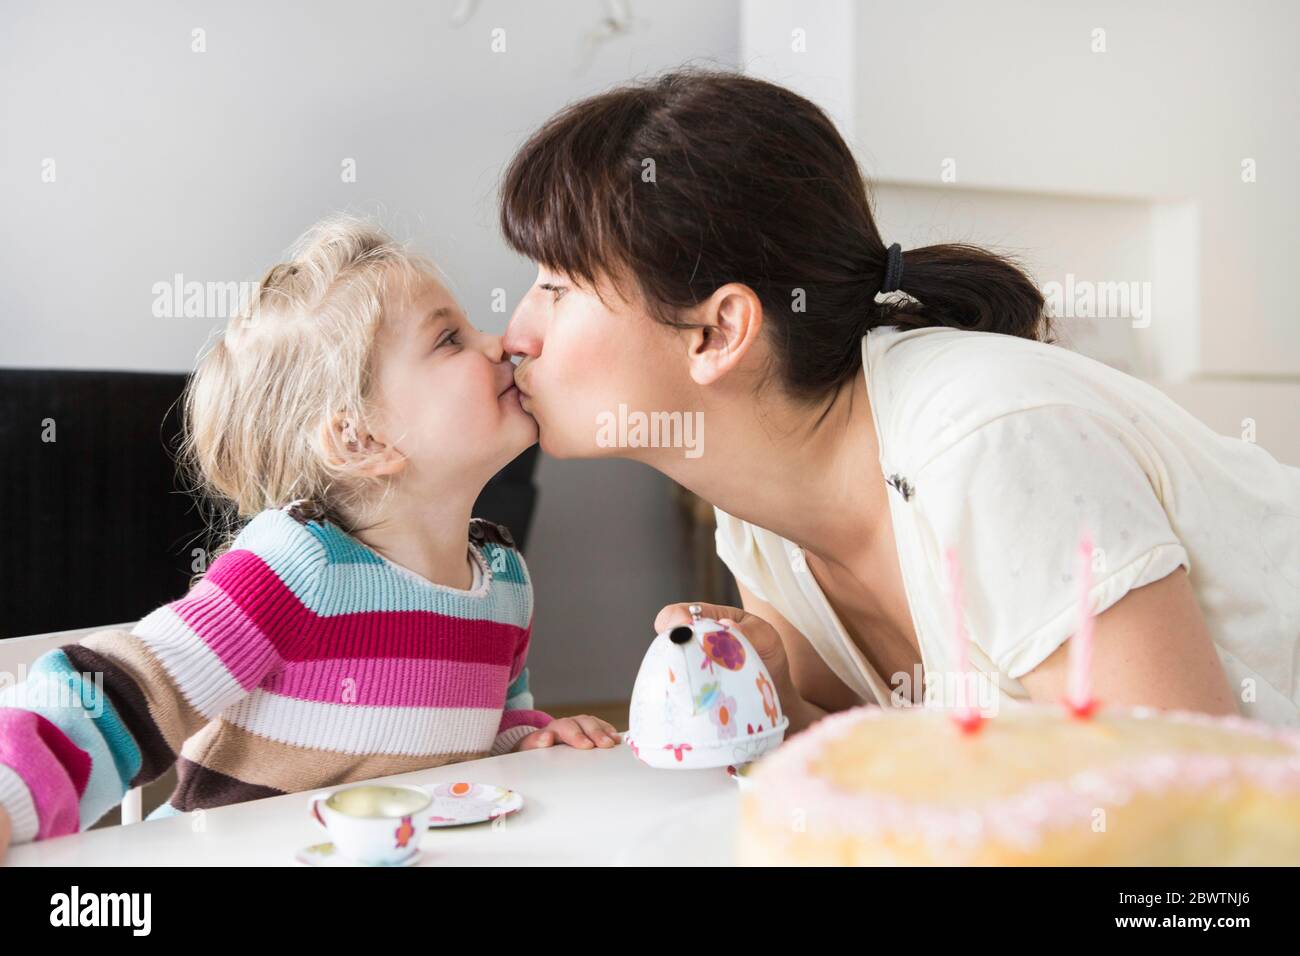 Mother and daughter playing with doll's china set, kissing each other Stock Photo